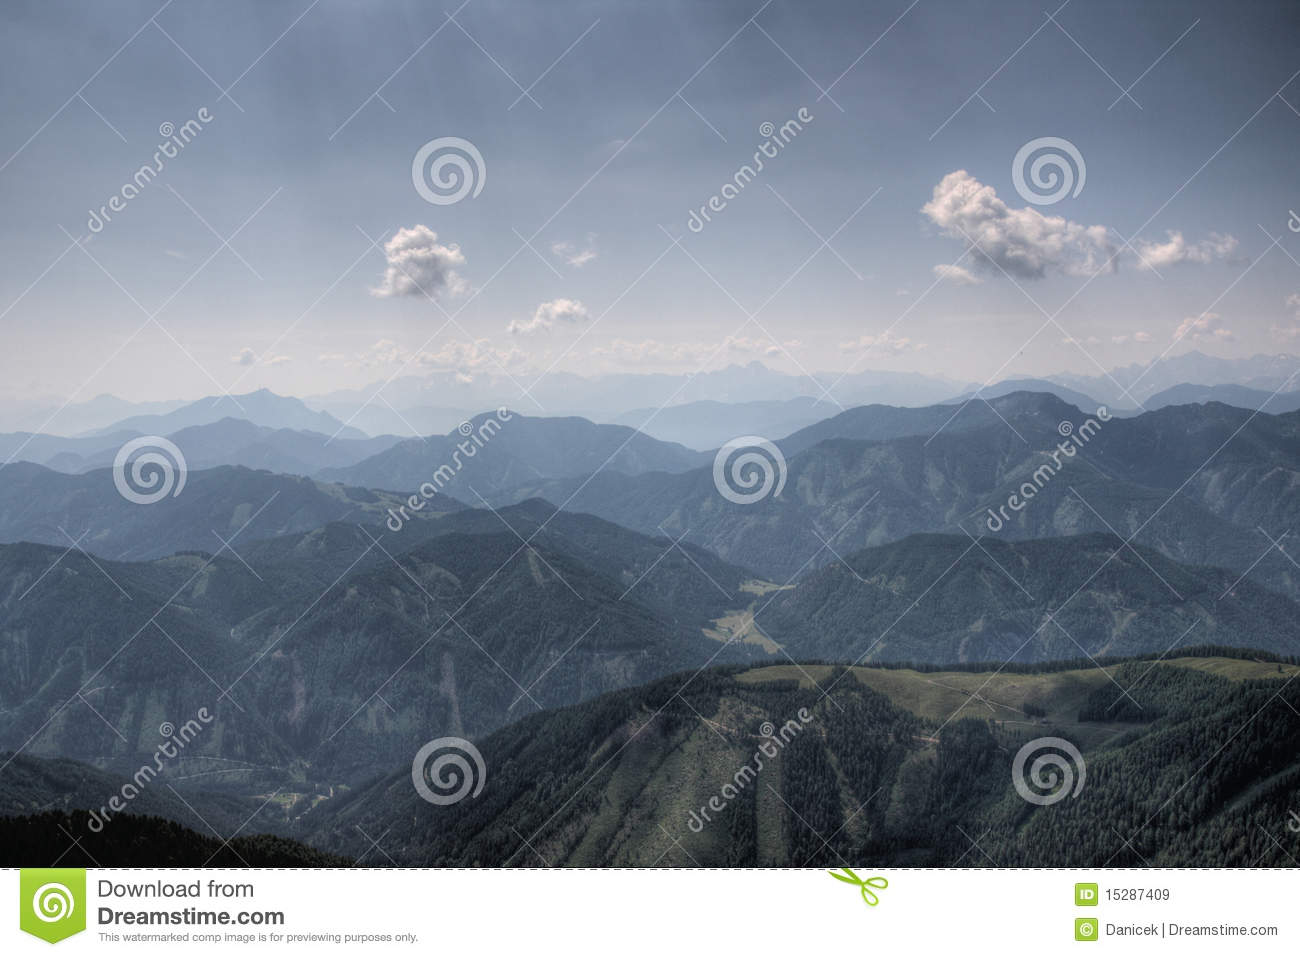 Alps Mountains Range Royalty Free Stock Images   Image  15287409